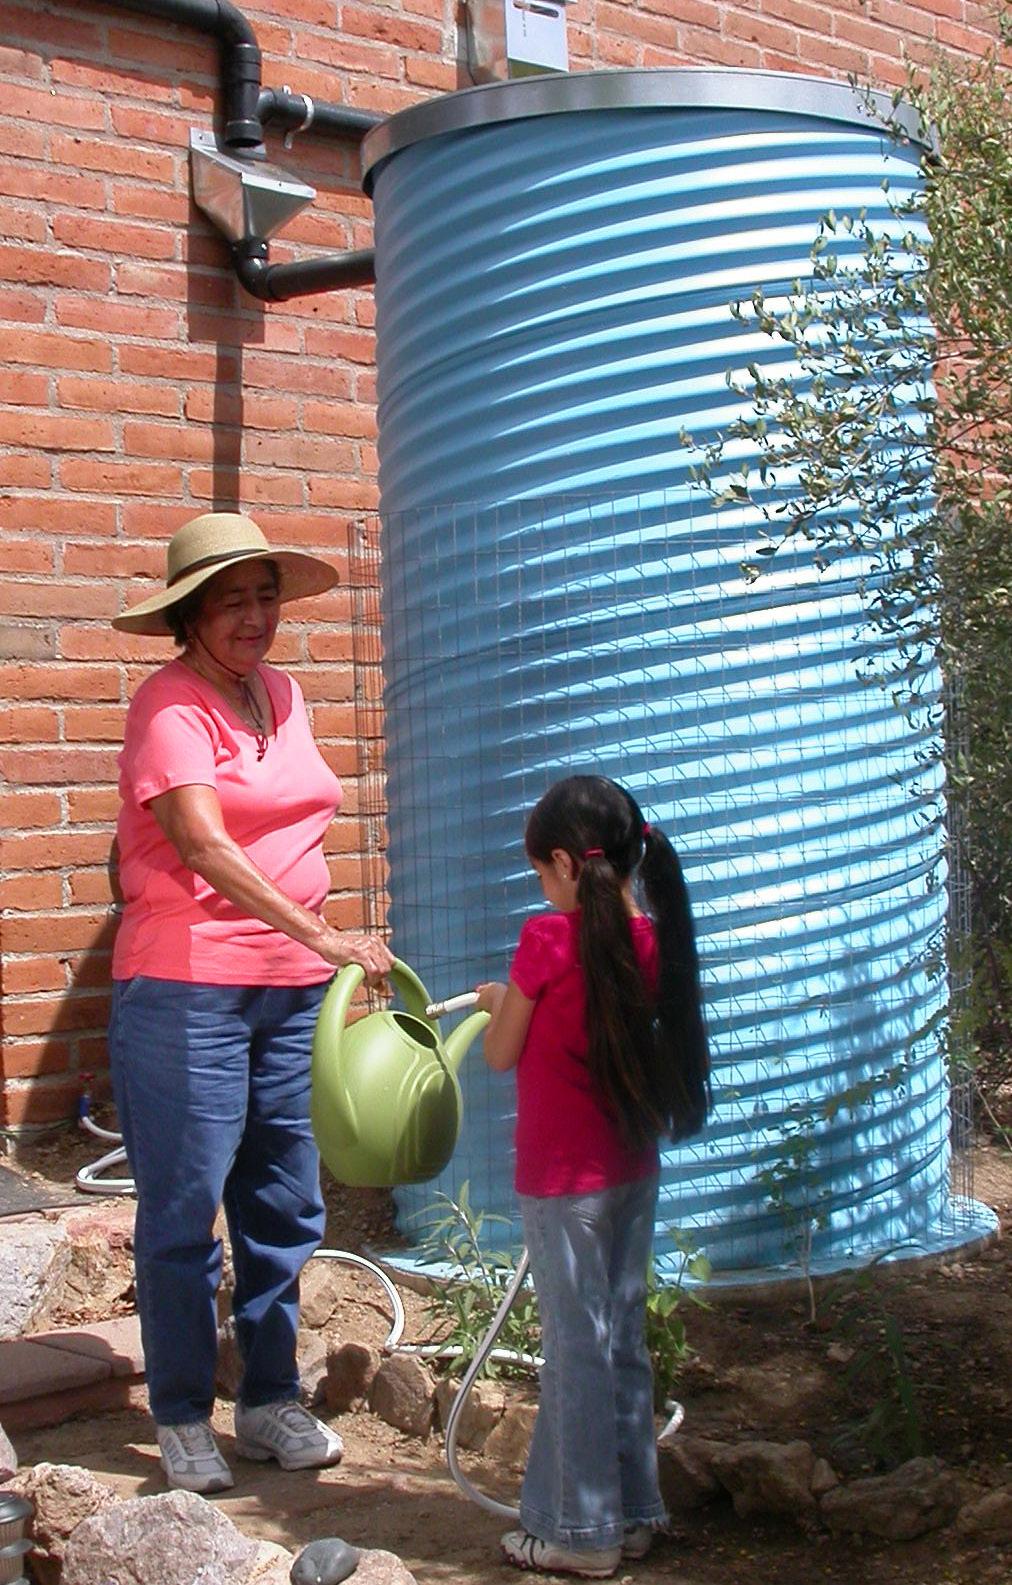 Tucson has been at the forefront of water conservation efforts in Arizona and in the country for three decades.